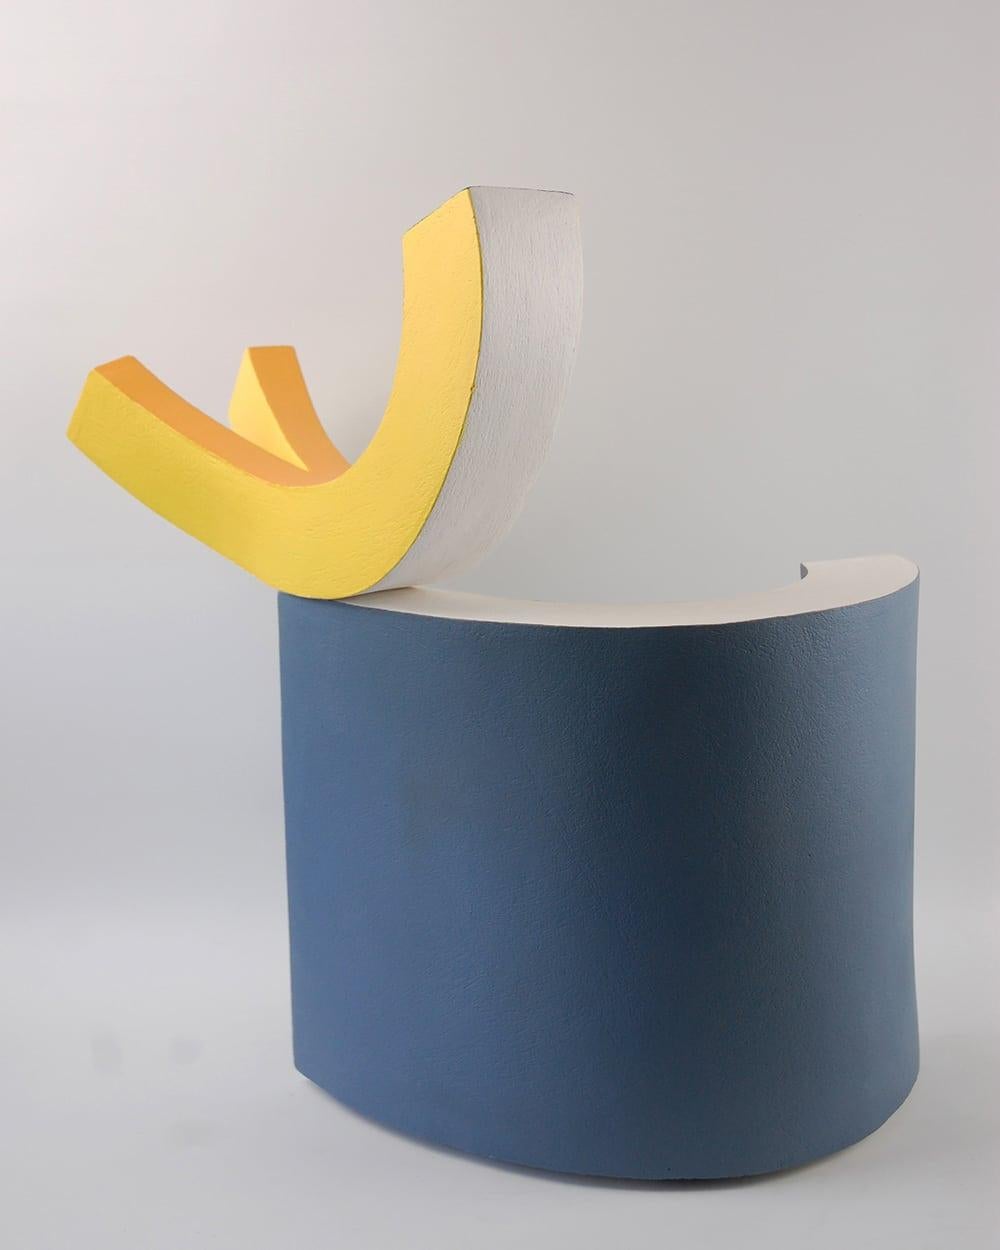 Bird by Patricia Volk - Abstract ceramic sculpture, painted clay, yellow, blue For Sale 2